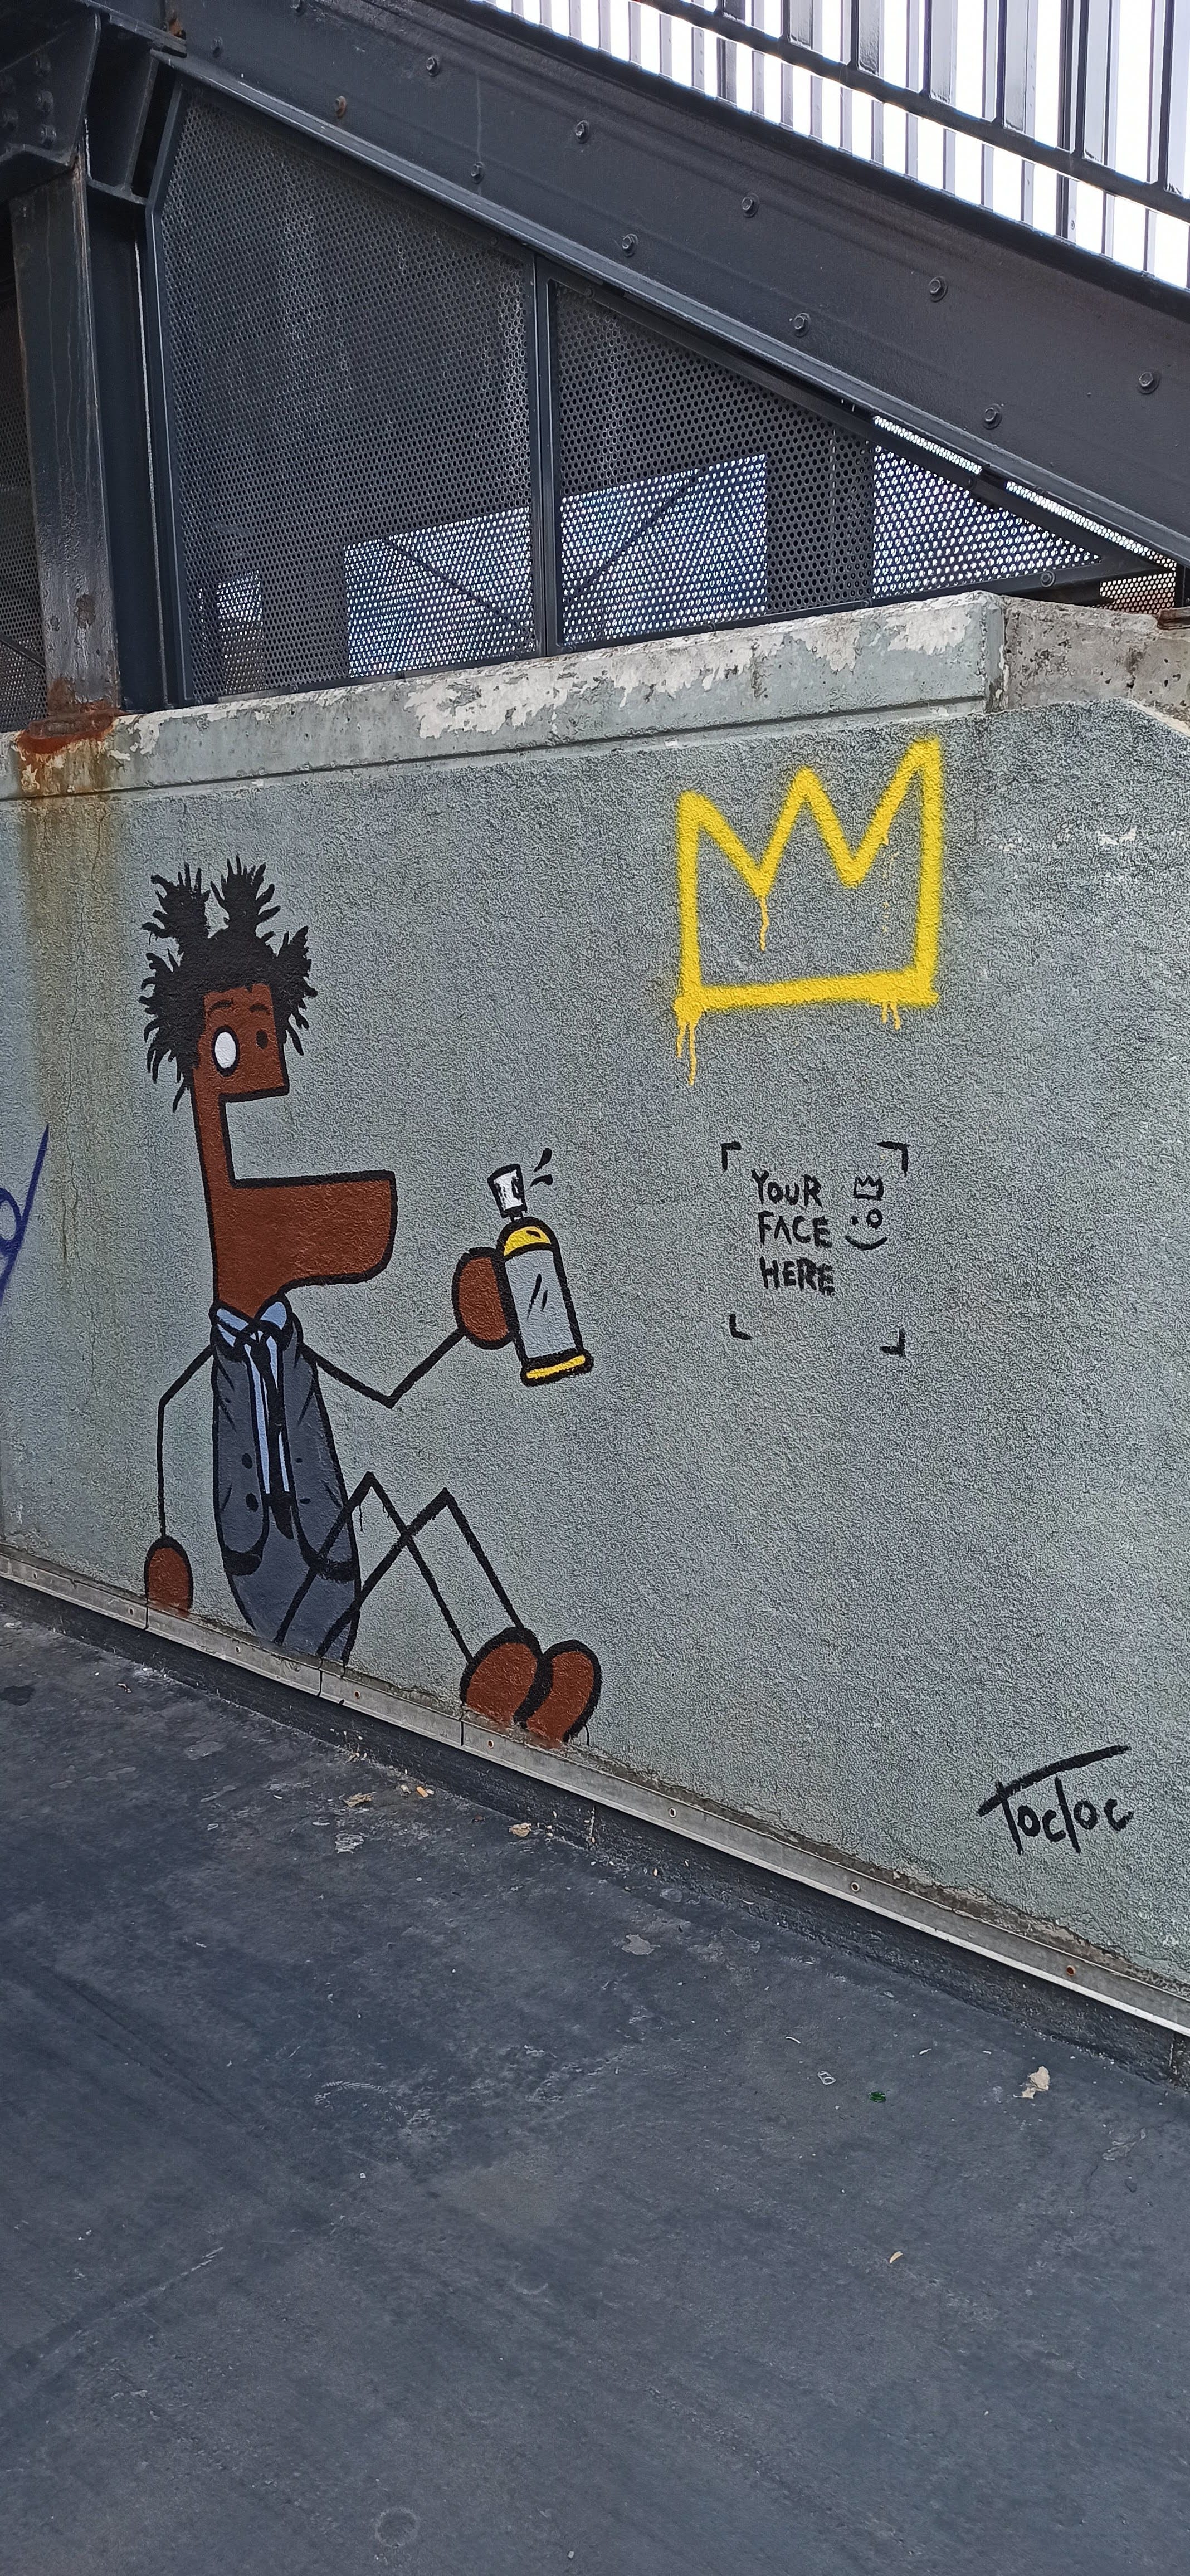 Graffiti 5249 Basquiat by the artist TocToc captured by Rabot in Roubaix France